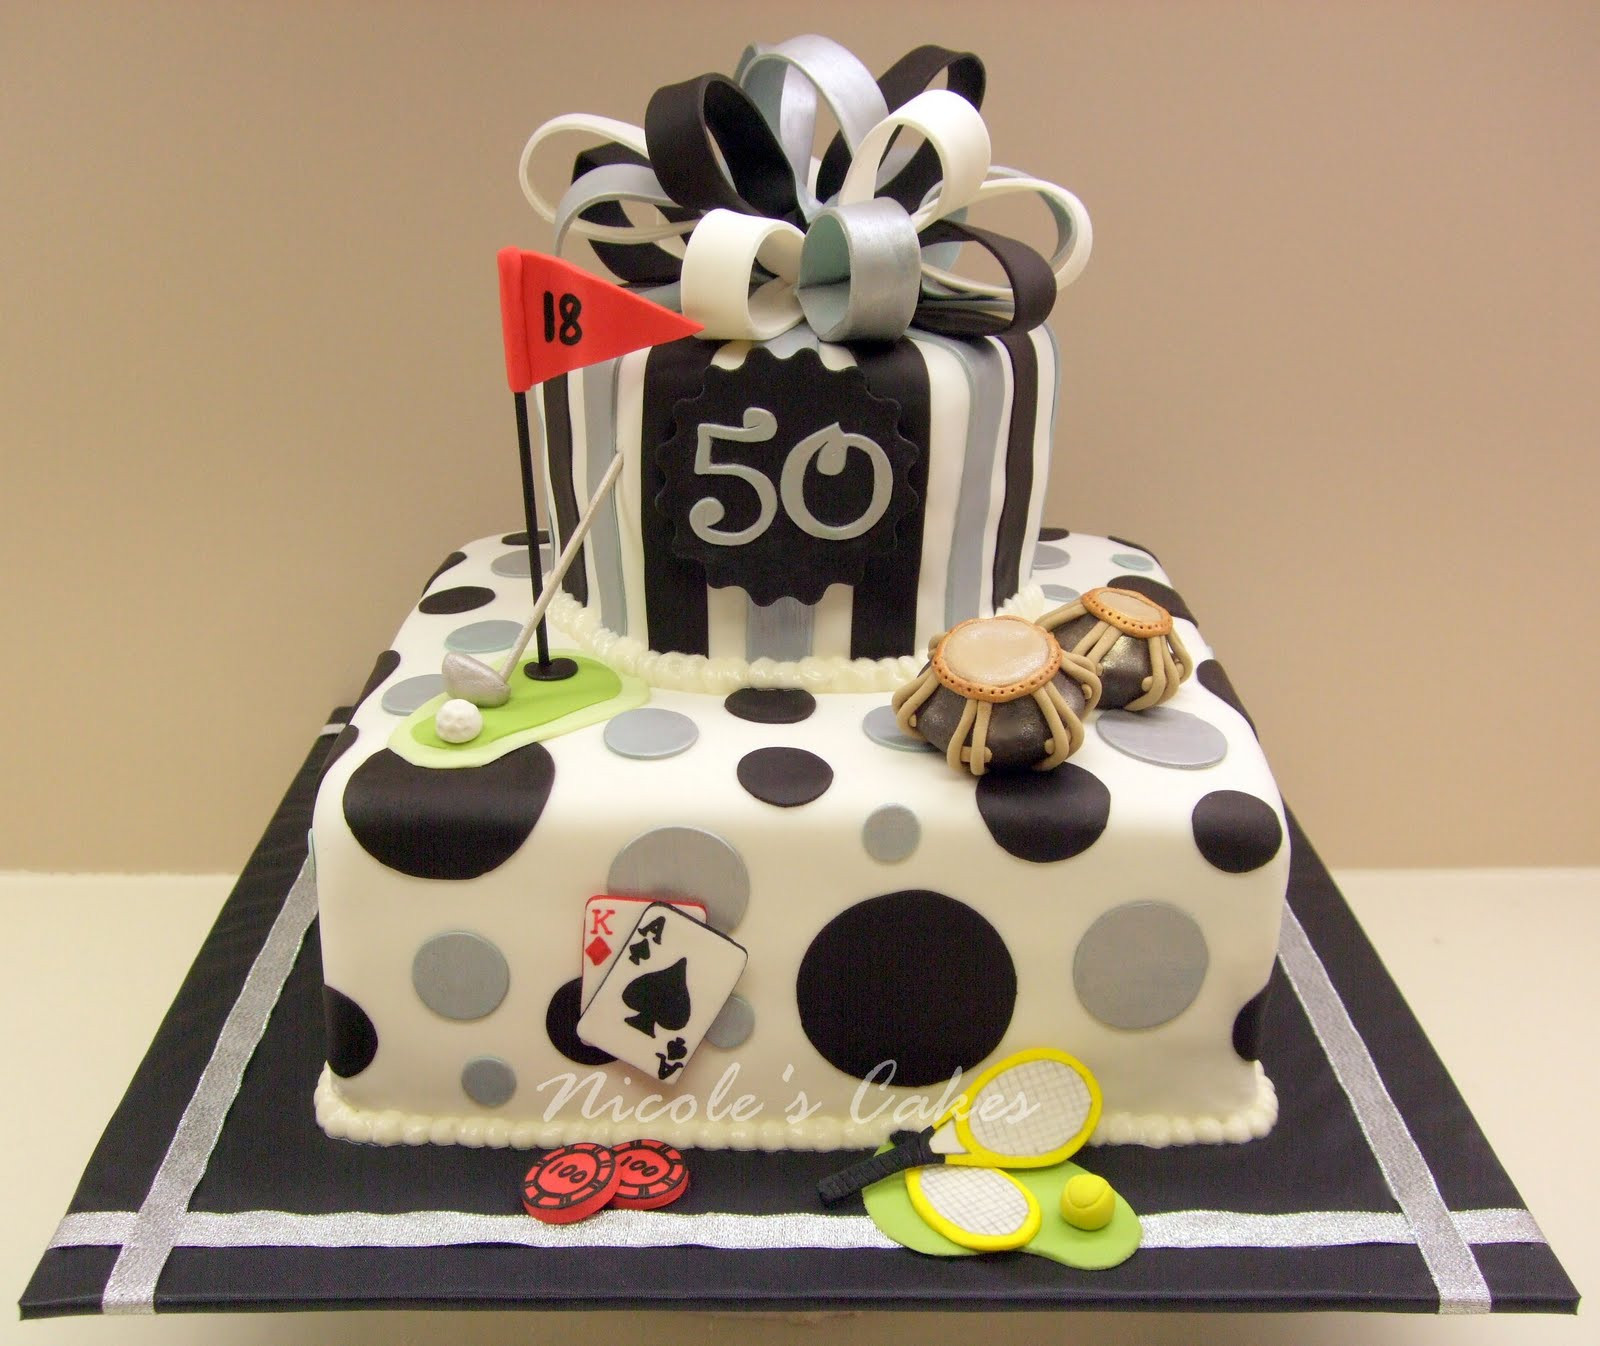 Best ideas about 50 Birthday Cake
. Save or Pin Confections Cakes & Creations Favorite Things A Now.